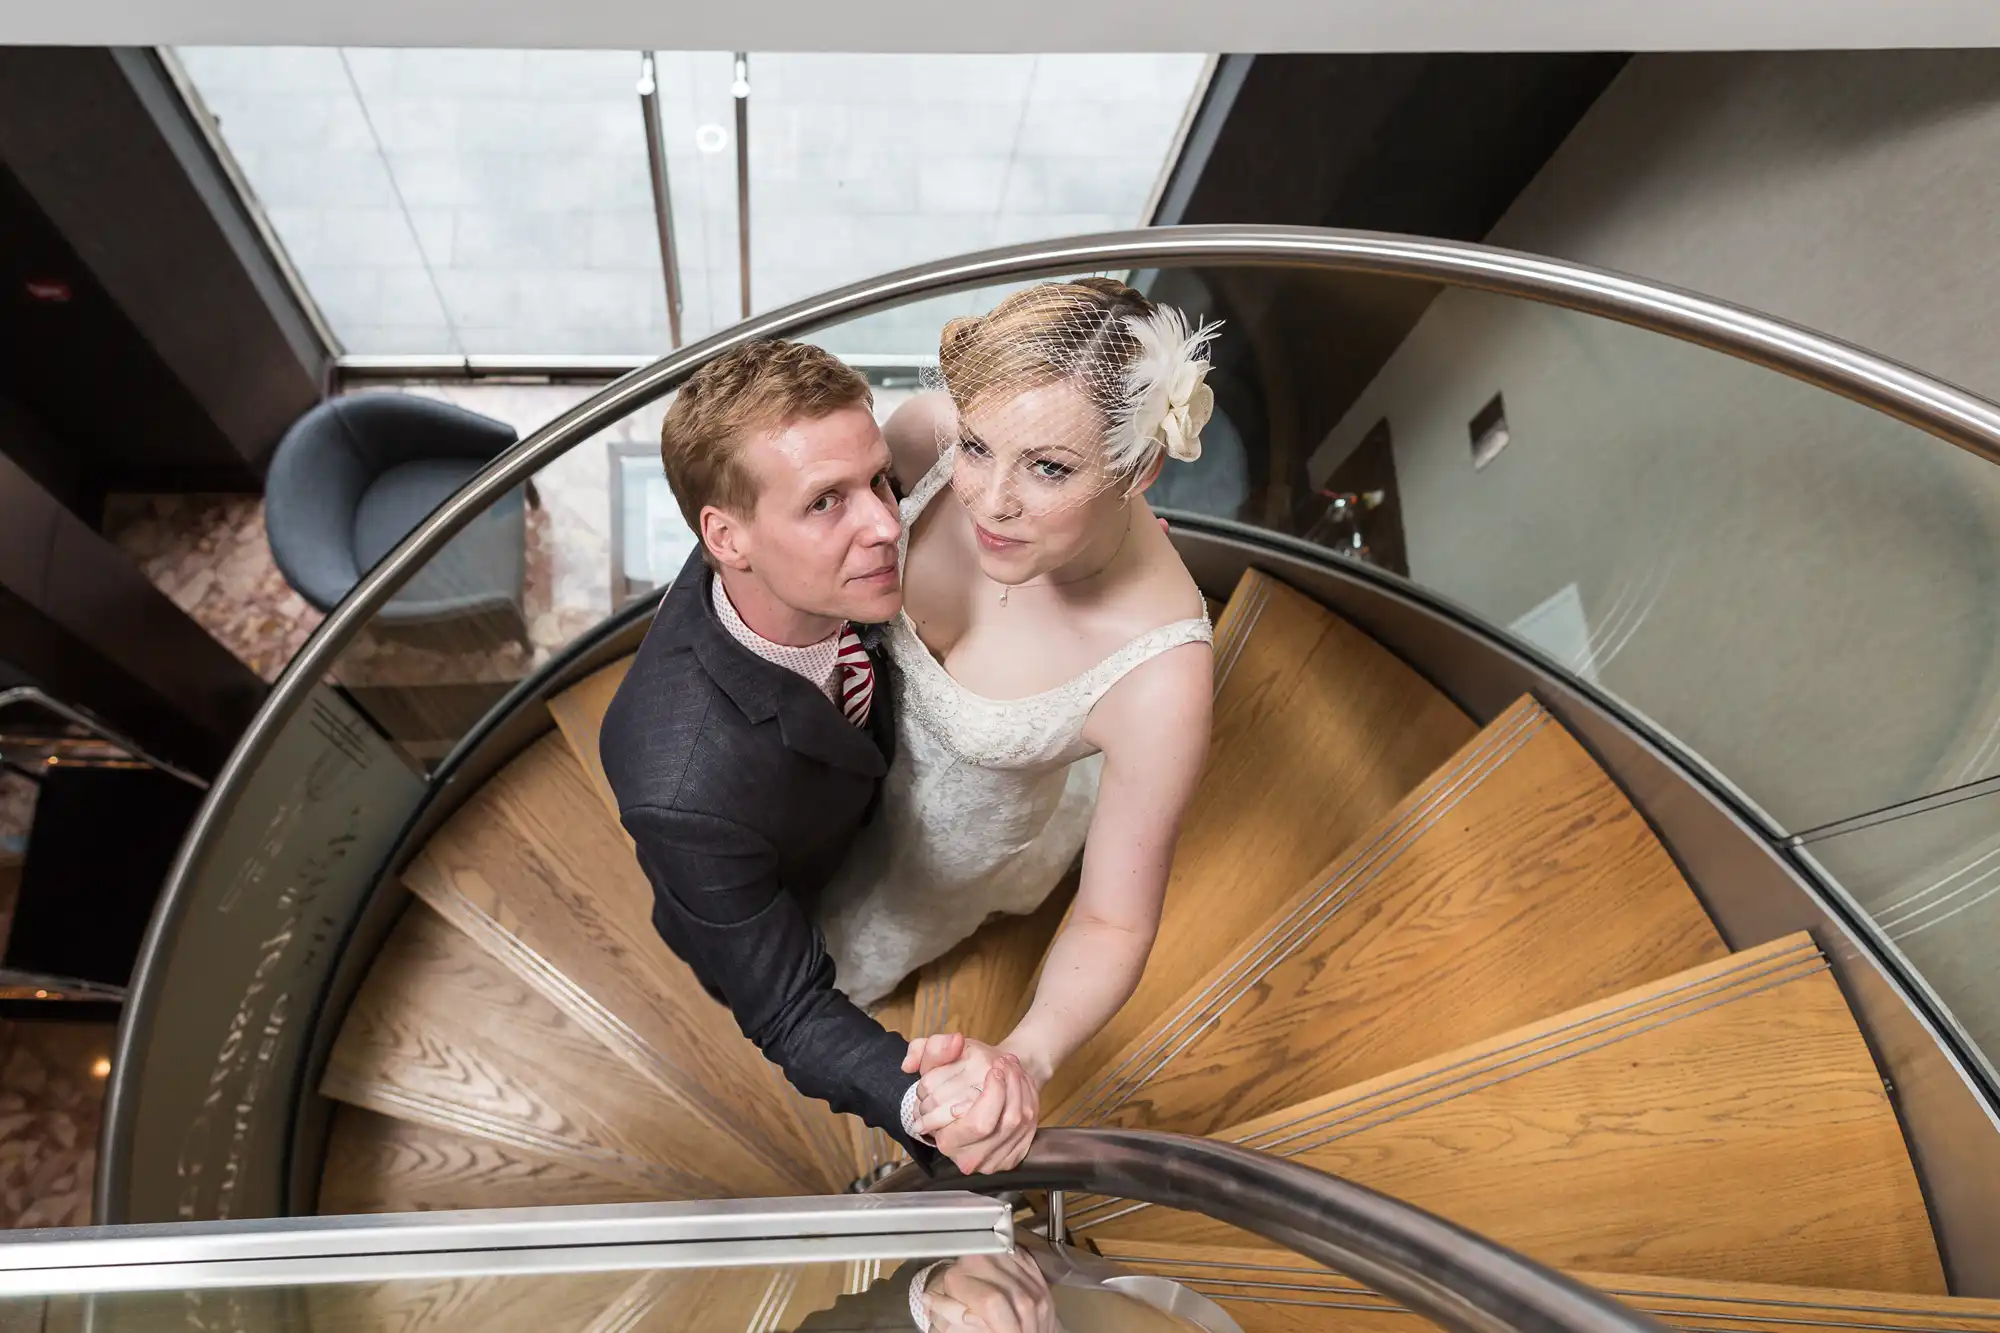 A newlywed couple holding hands while ascending a spiral staircase, looking upwards towards the camera.